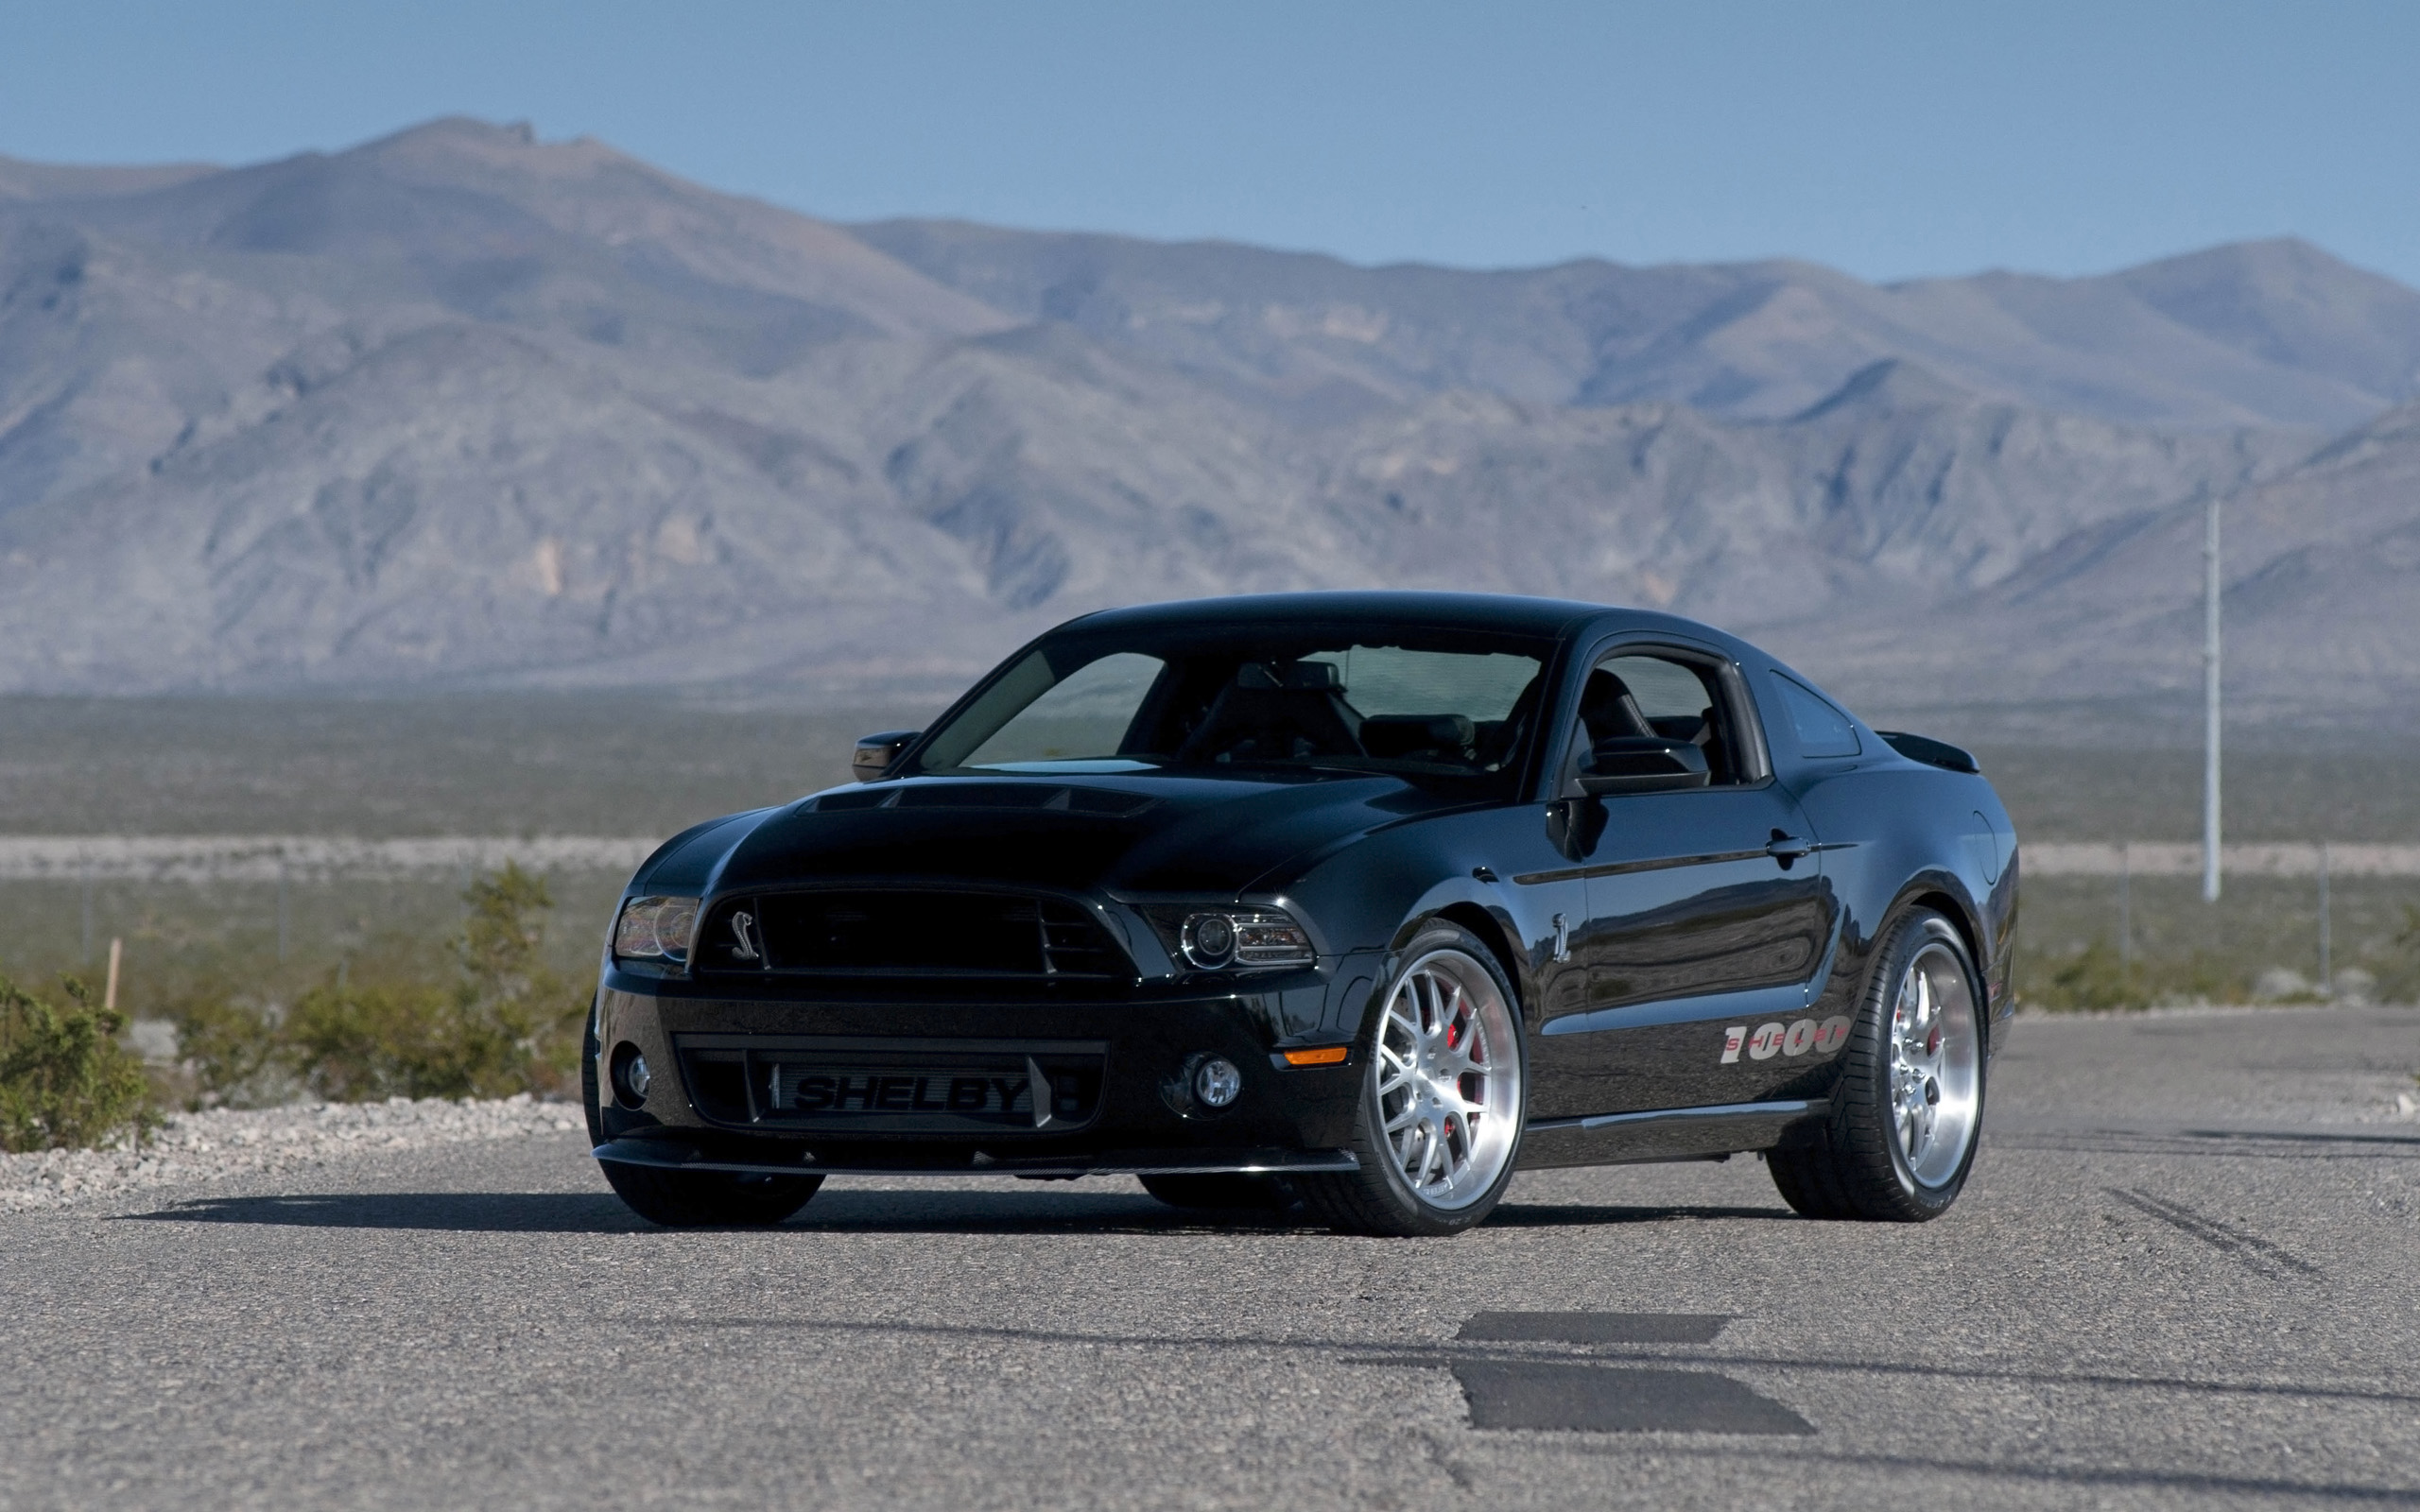 2013, Shelby, 1000, Ford, Mustang, Muscle, Supercar, Gq Wallpaper